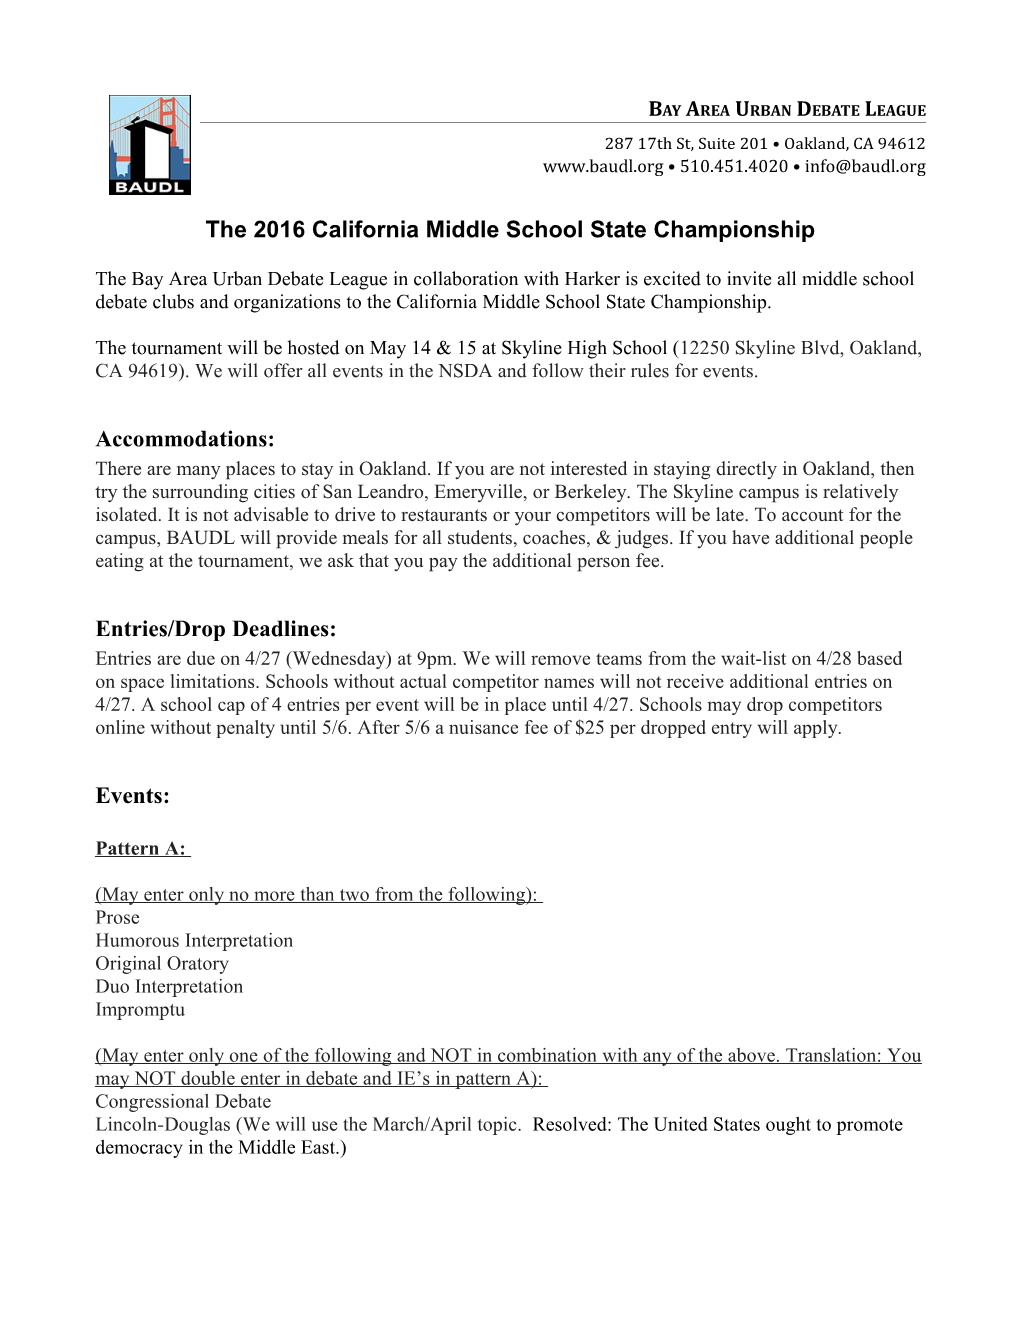 The 2016 California Middle School State Championship